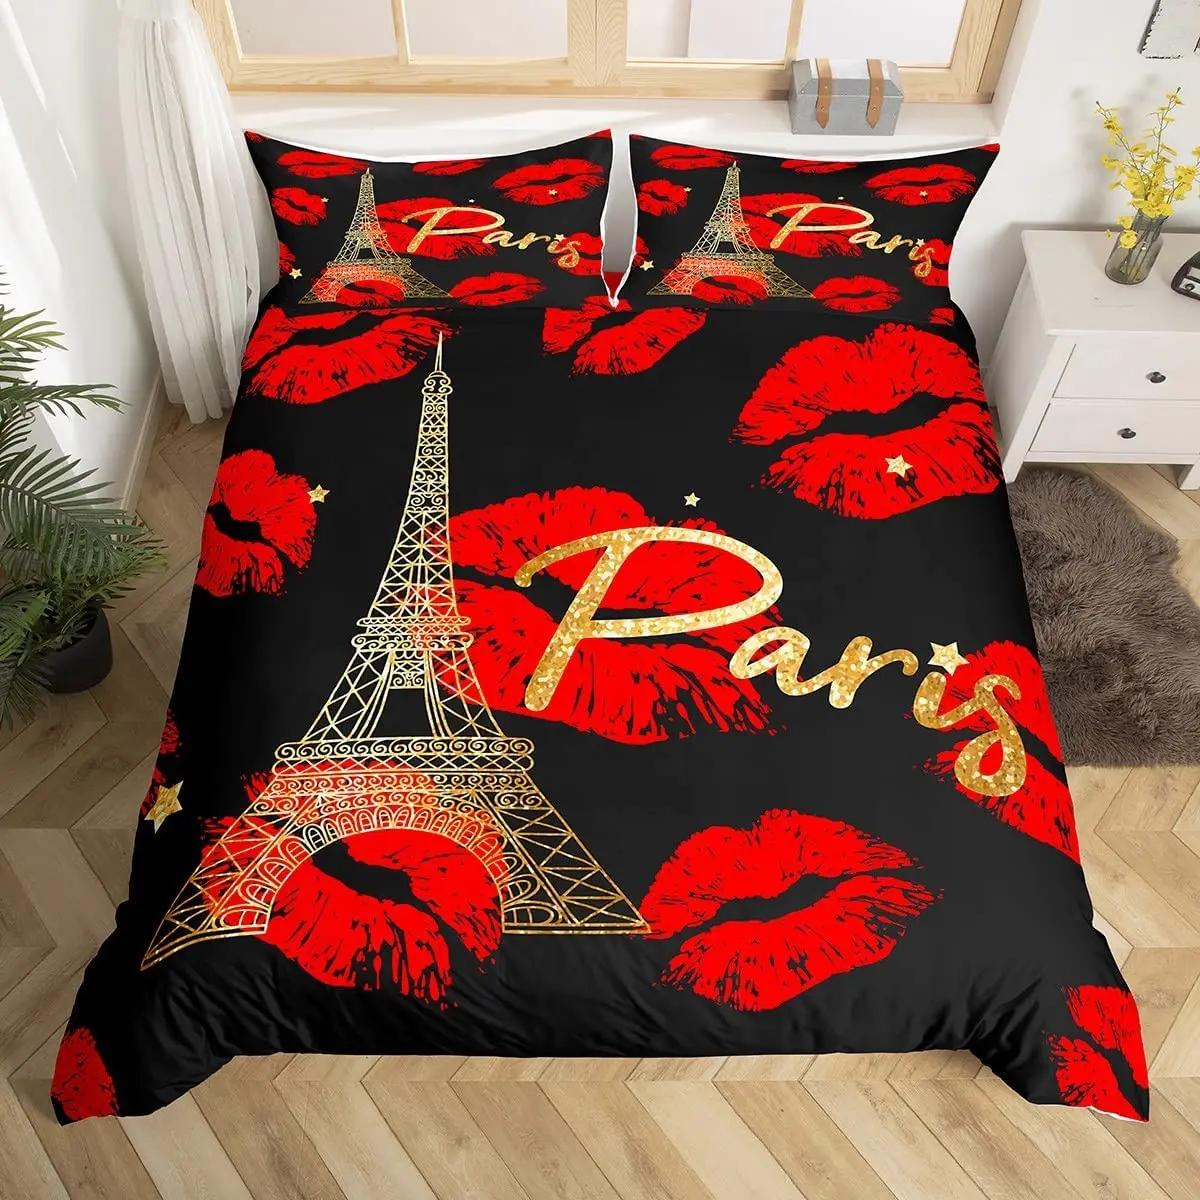 

Paris Duvet Cover Set Red Lips Kiss Marks Decor Bedding Set 3pcs for Girls and Adults Eiffel Tower Comforter Cover Quilt Cover